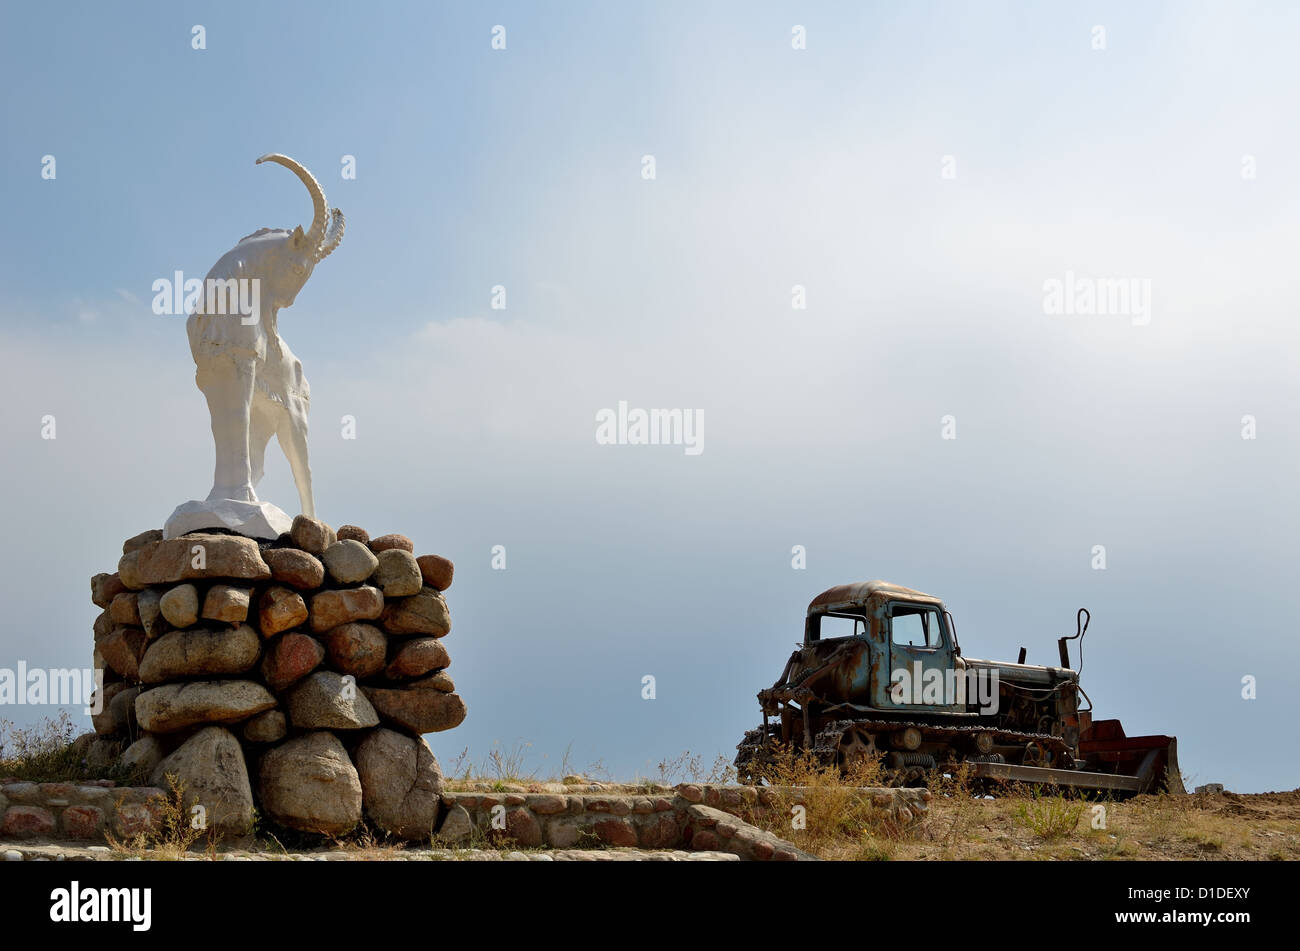 Sculpture of a stone goat and old tractor in Issyk-Kul region of Kyrgyzstan Stock Photo